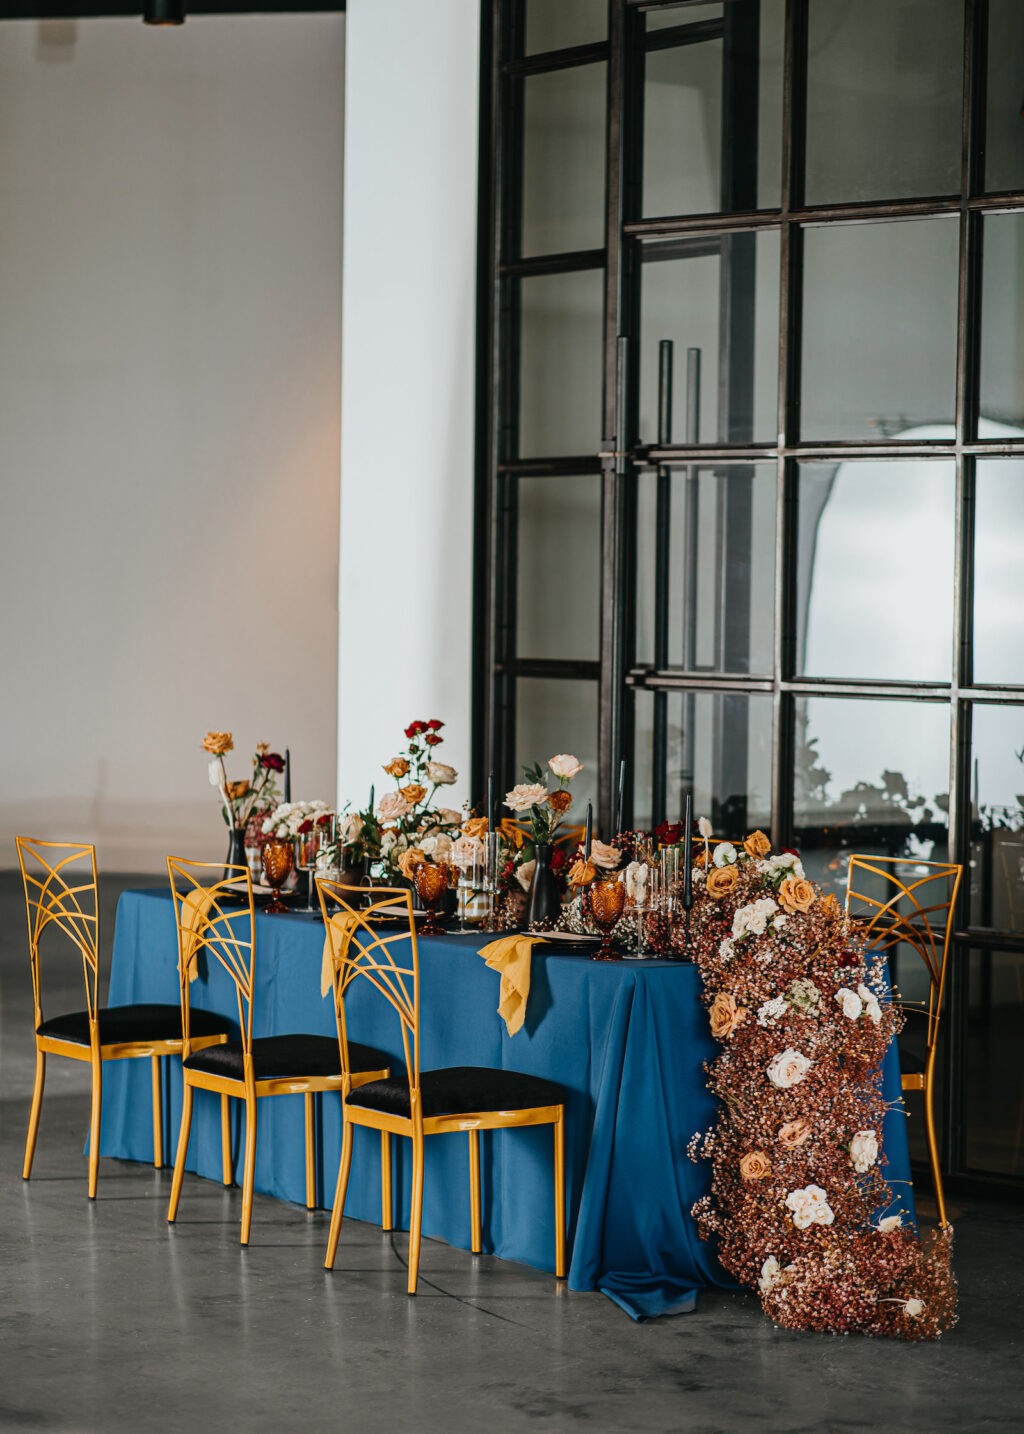 Modern and Edgy Fall Wedding Decor, Long Table with Royal Blue Table Linen, Lush Floral Table Runner, Chic Gold Chairs | Tampa Bay Wedding Venue Hyde House | Wedding Rentals Kate Ryan Event Rentals